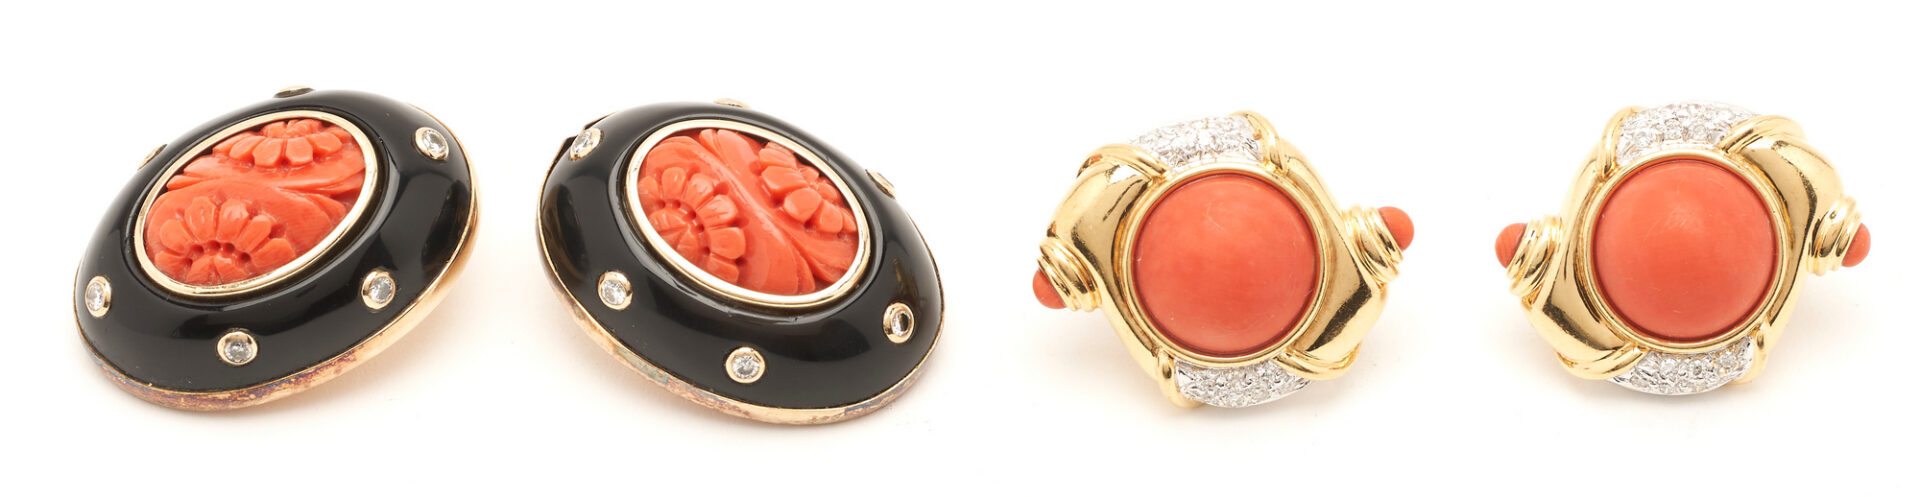 Lot 61: 2 Pairs of Gold, Coral, & Diamond Earrings